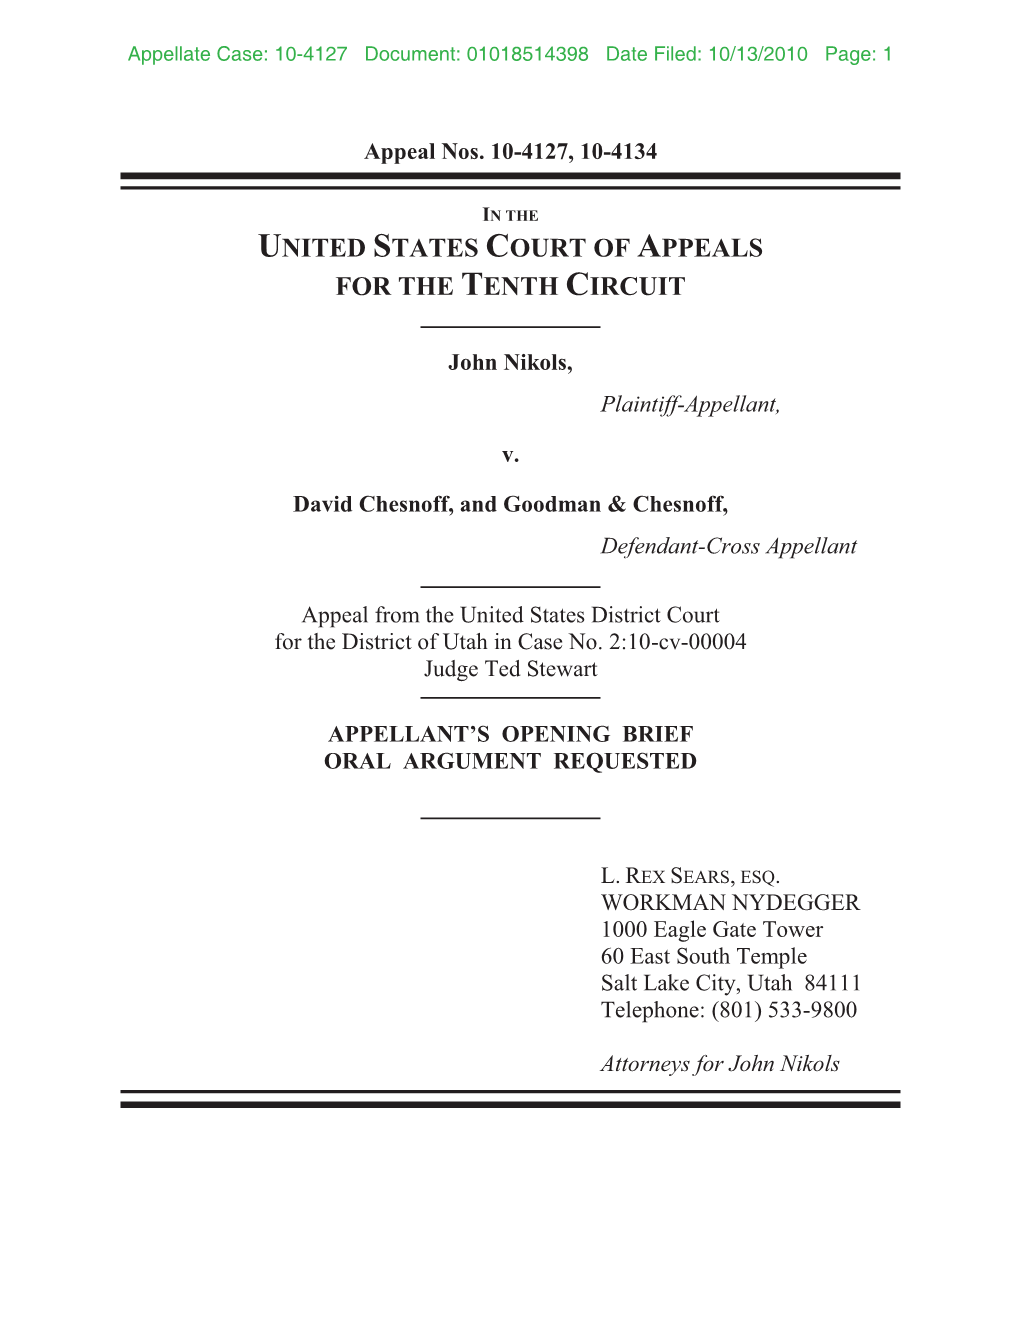 United States Court of Appeals for the Tenth Circuit